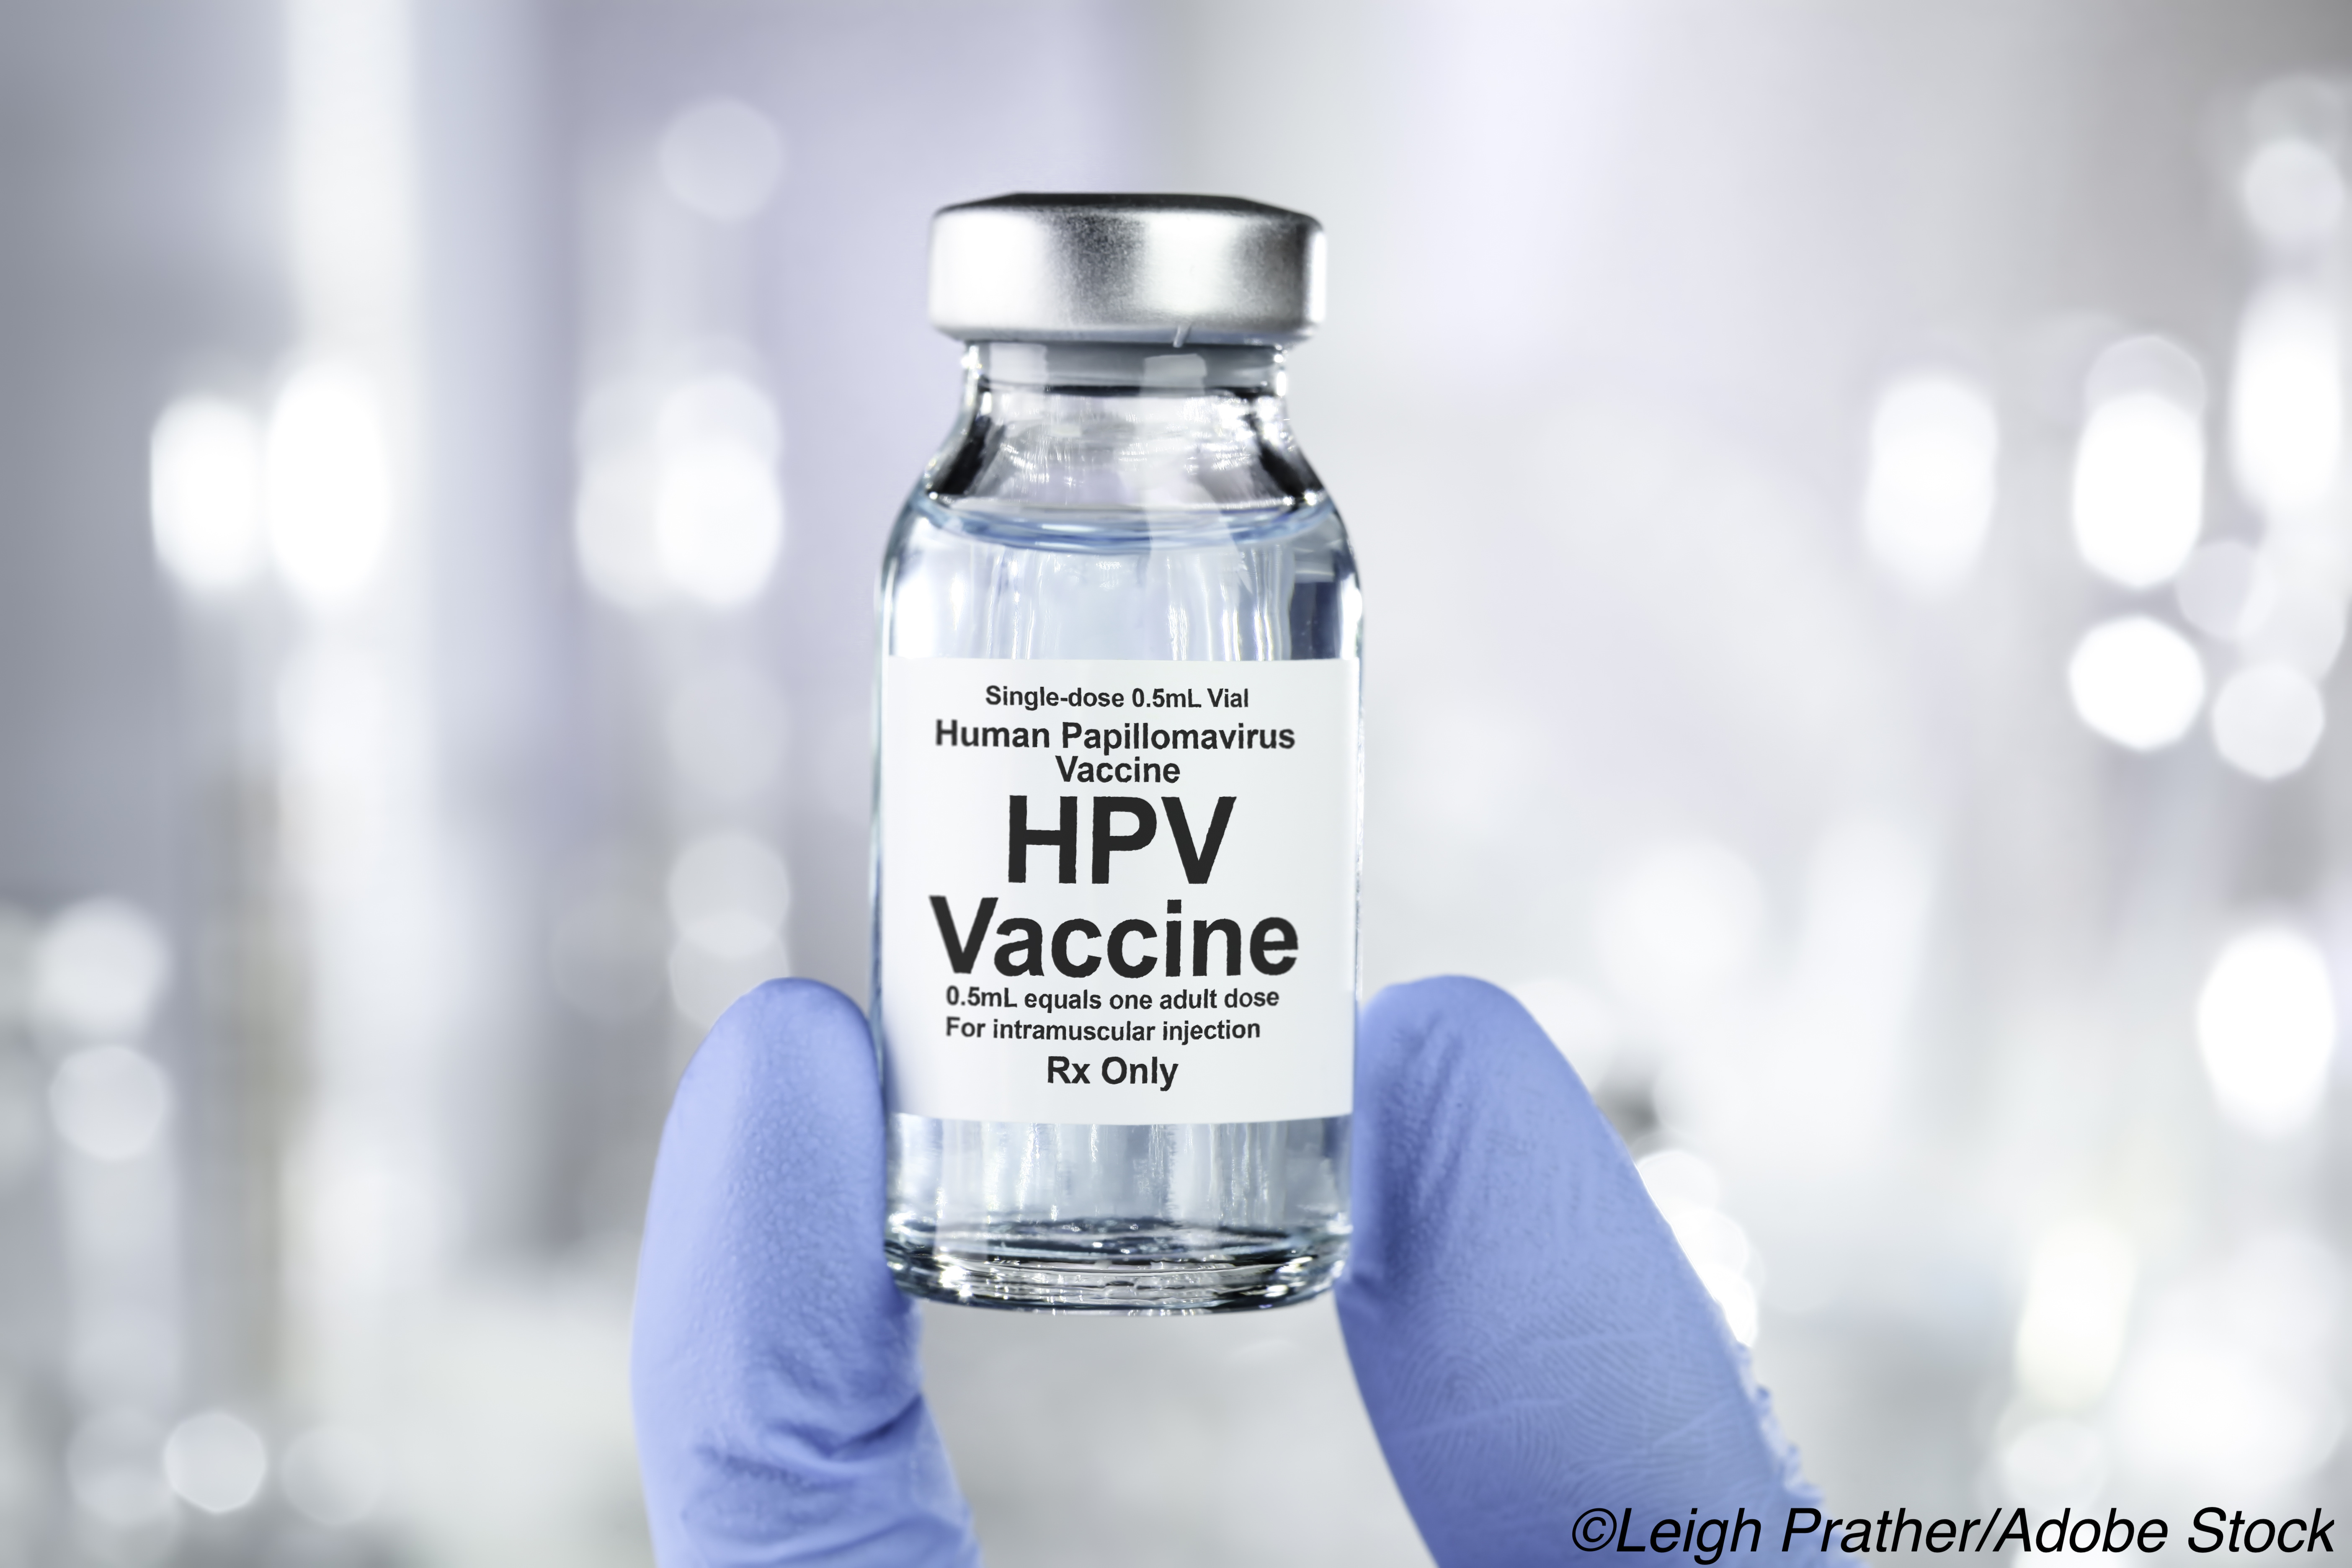 HPV Vax Uptake Increasing But Fails to Meet ’Healthy People 2020’ Goal